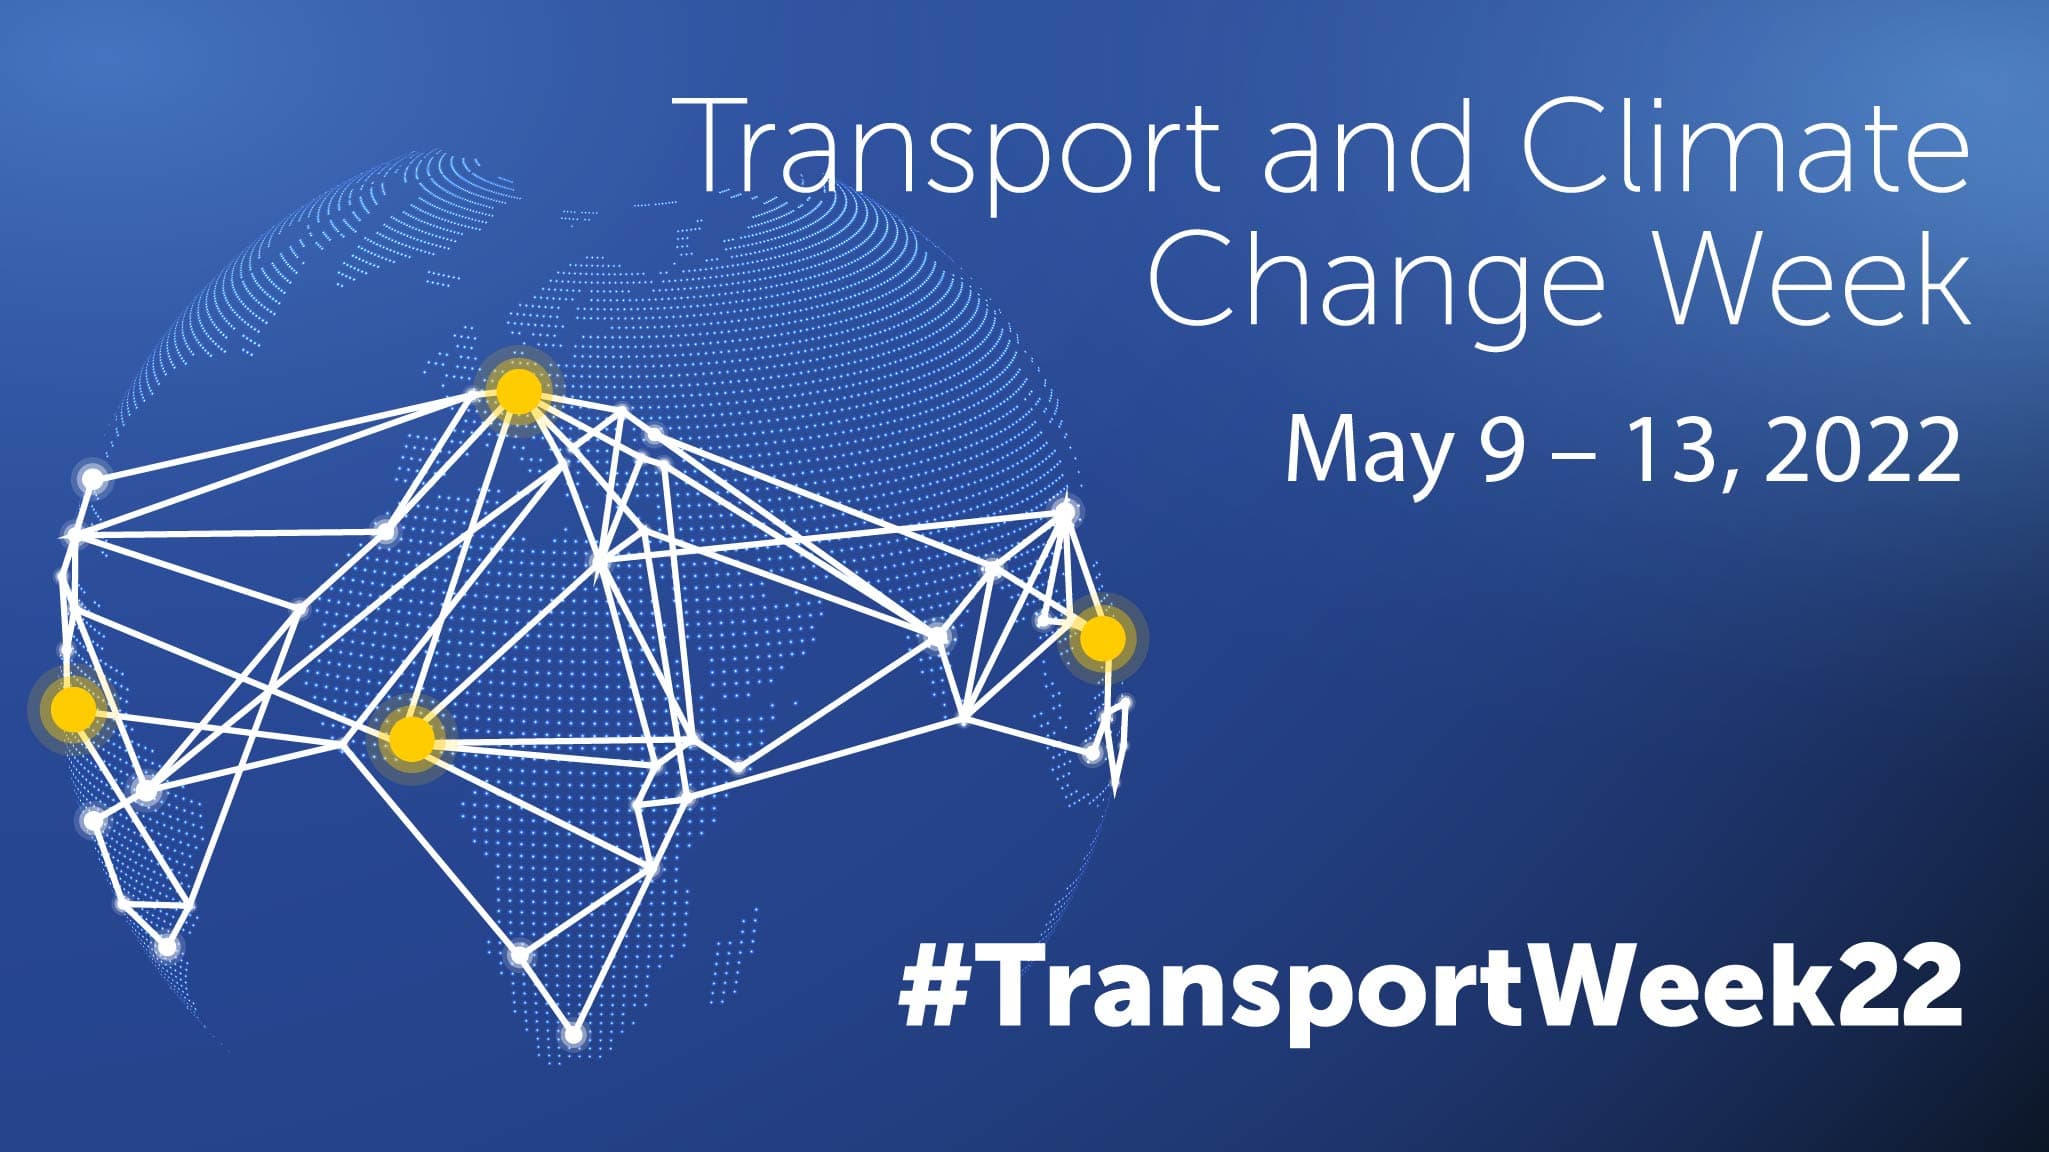 What's New About Transportandclimate